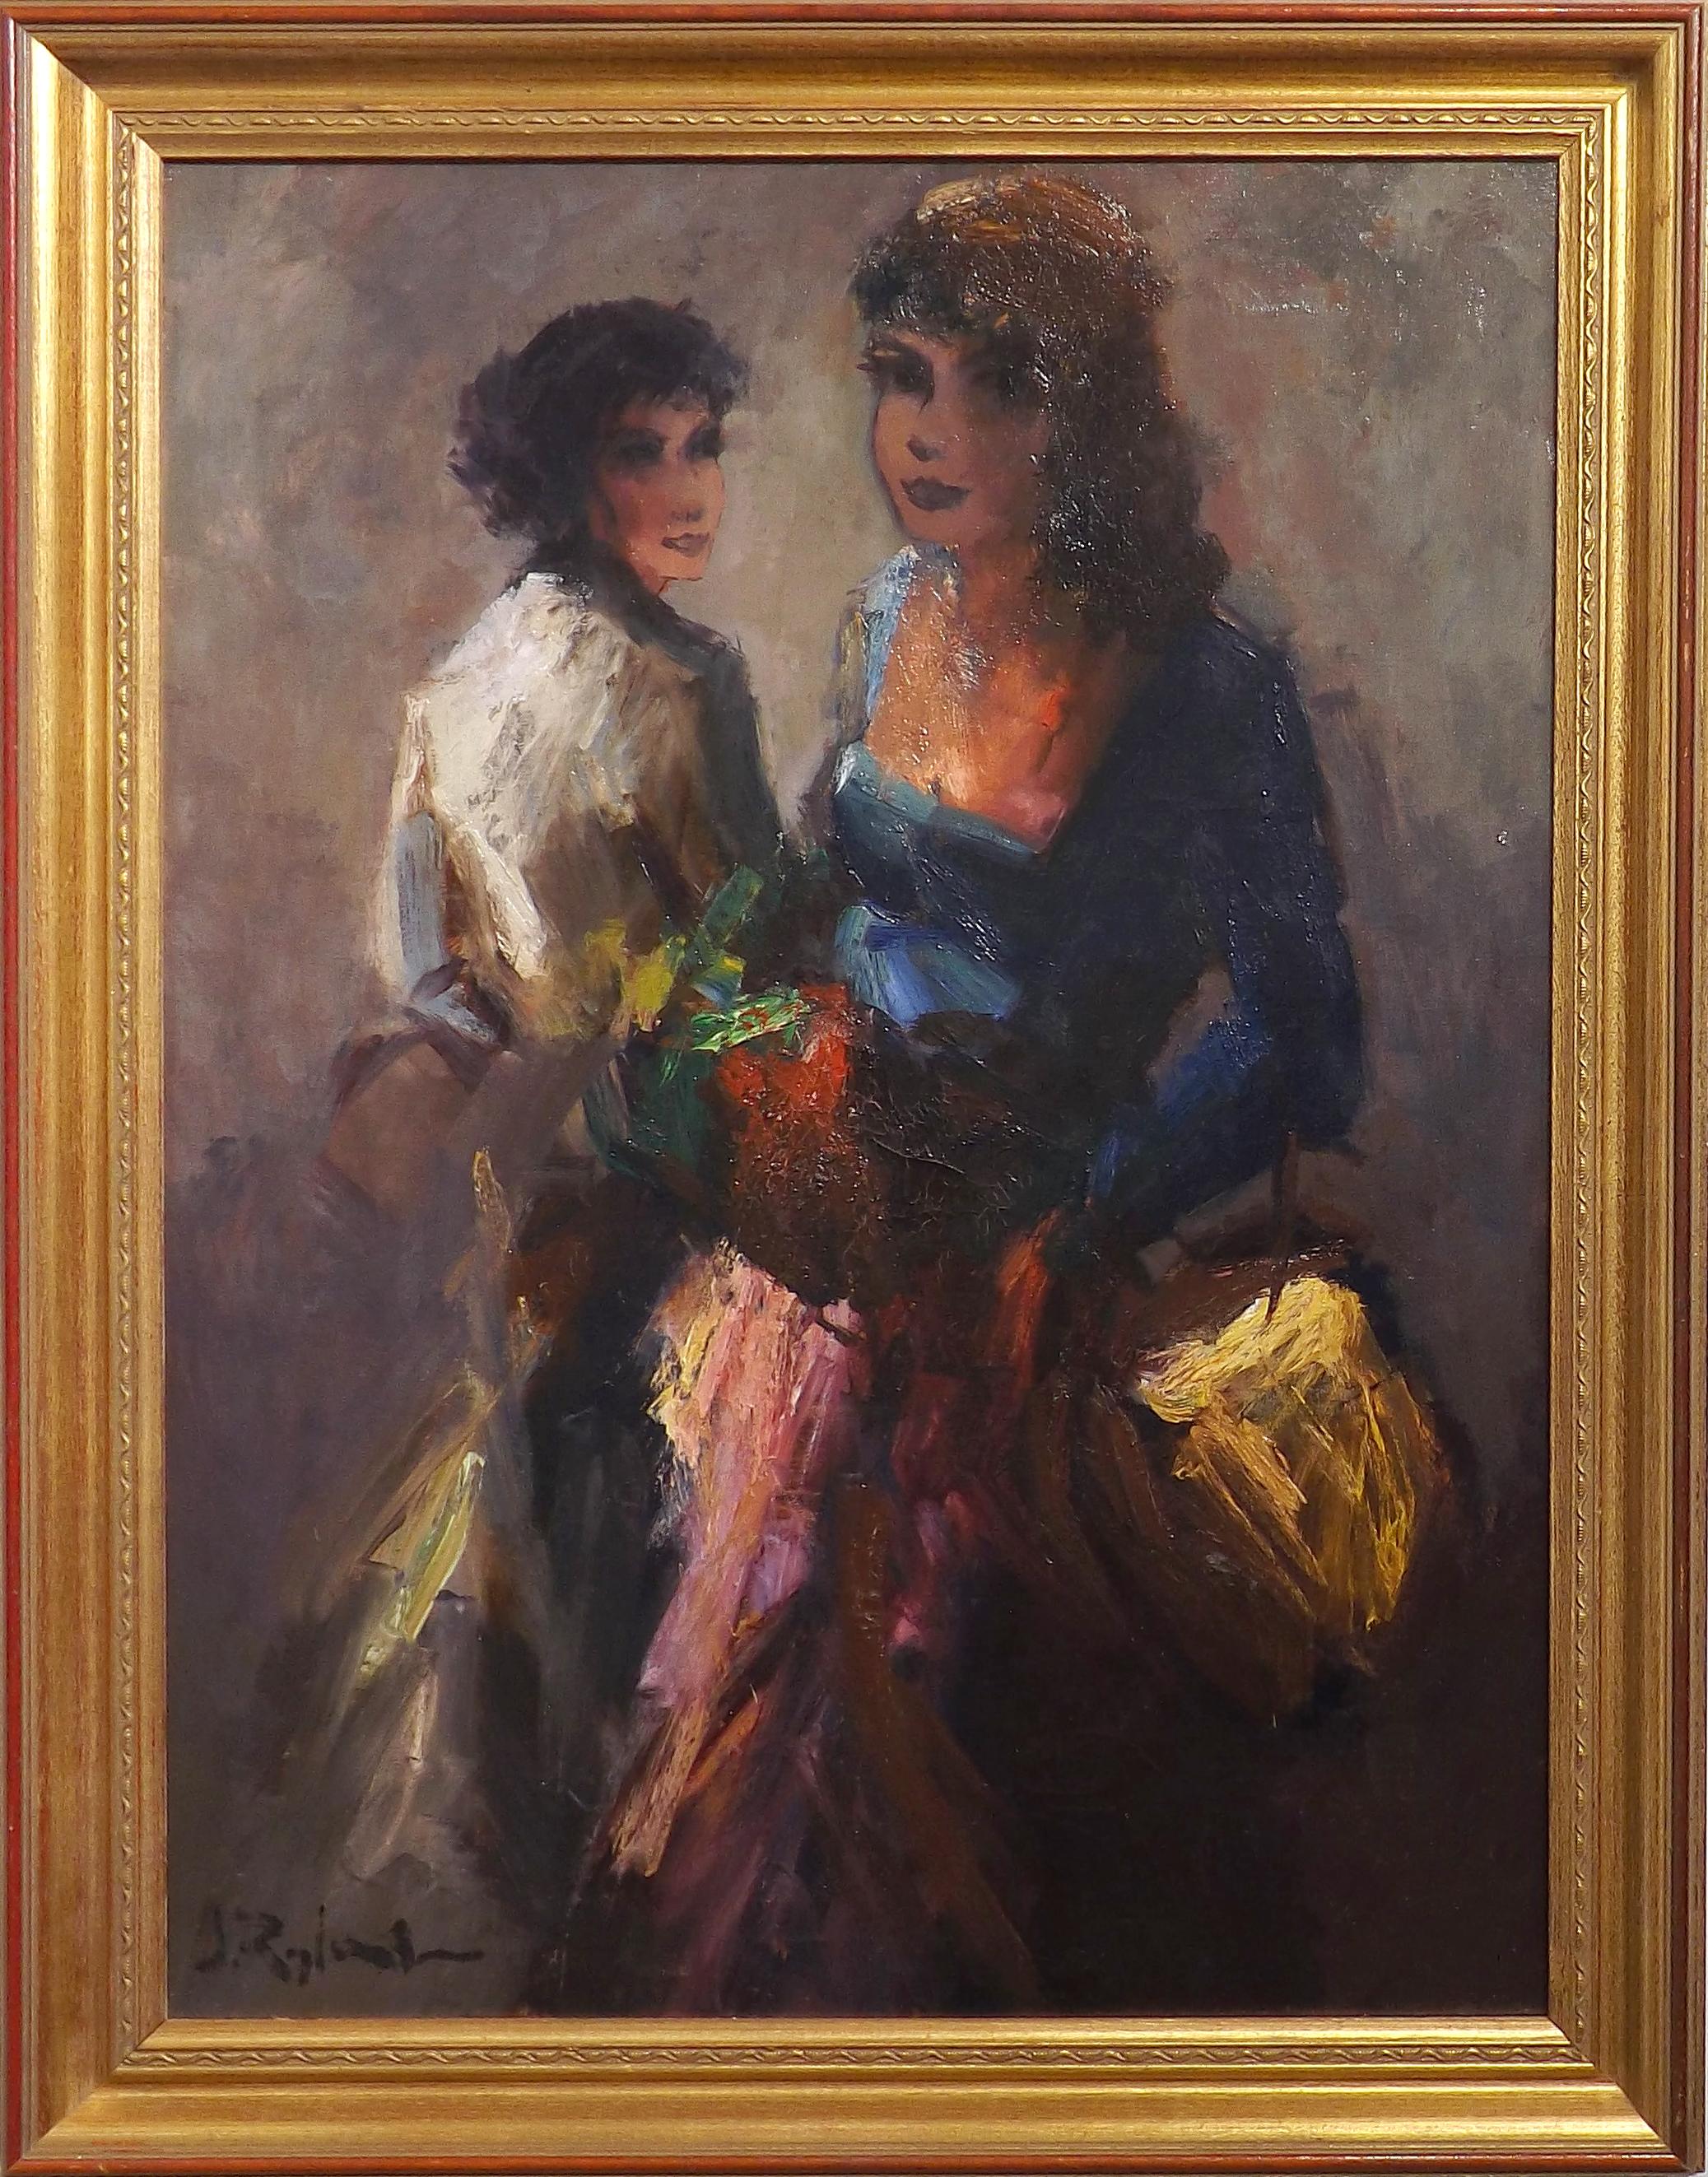 A wonderful portrait of two women painted by Jan Rijlaarsdam, one of whom is carrying a bouquet of flowers. Painted in a midcentury / 1960s French style, with wonderful bright colors. Jan Riijlaarsdam was born in The Netherlands in 1911 and was a